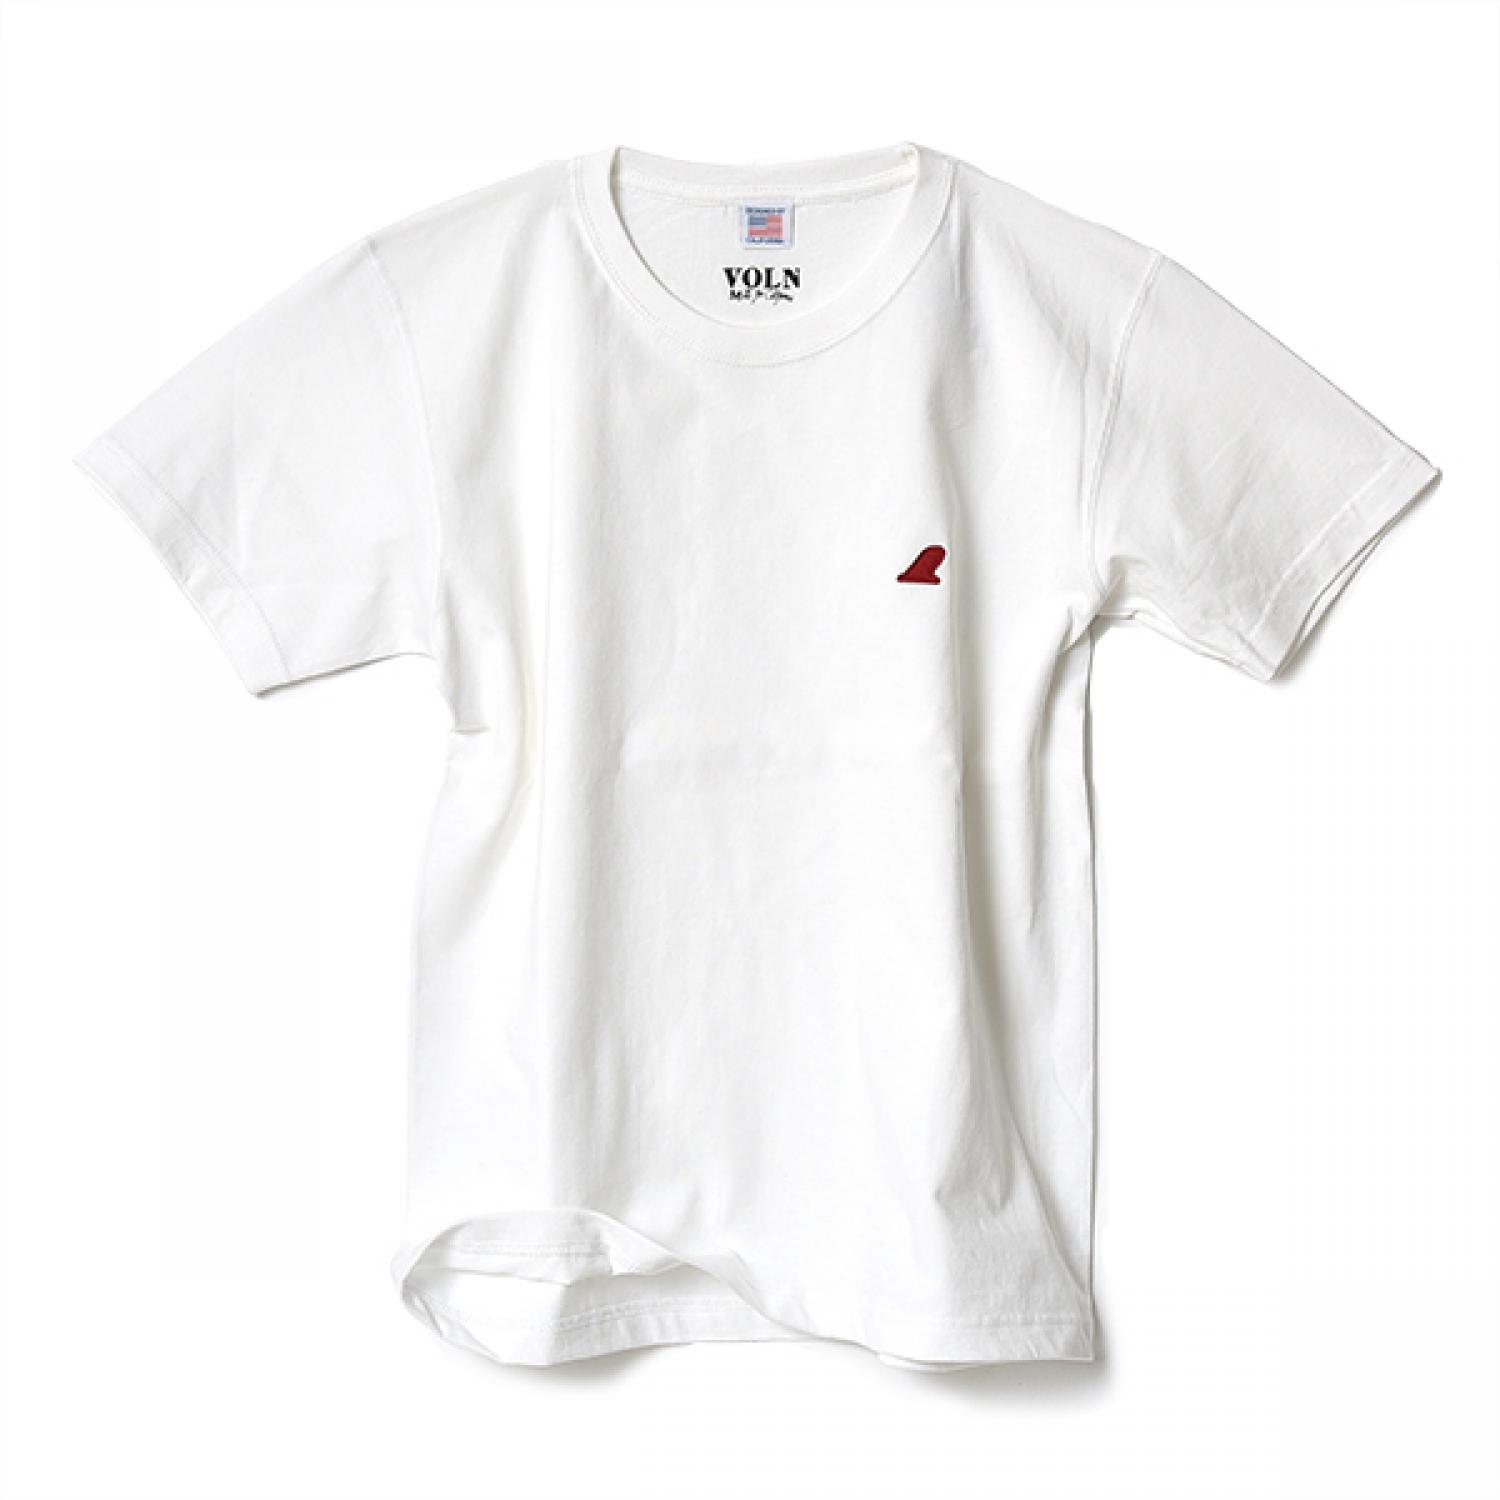 VOLN CREW NECK T-SHIRT /RED FIN  WHITE